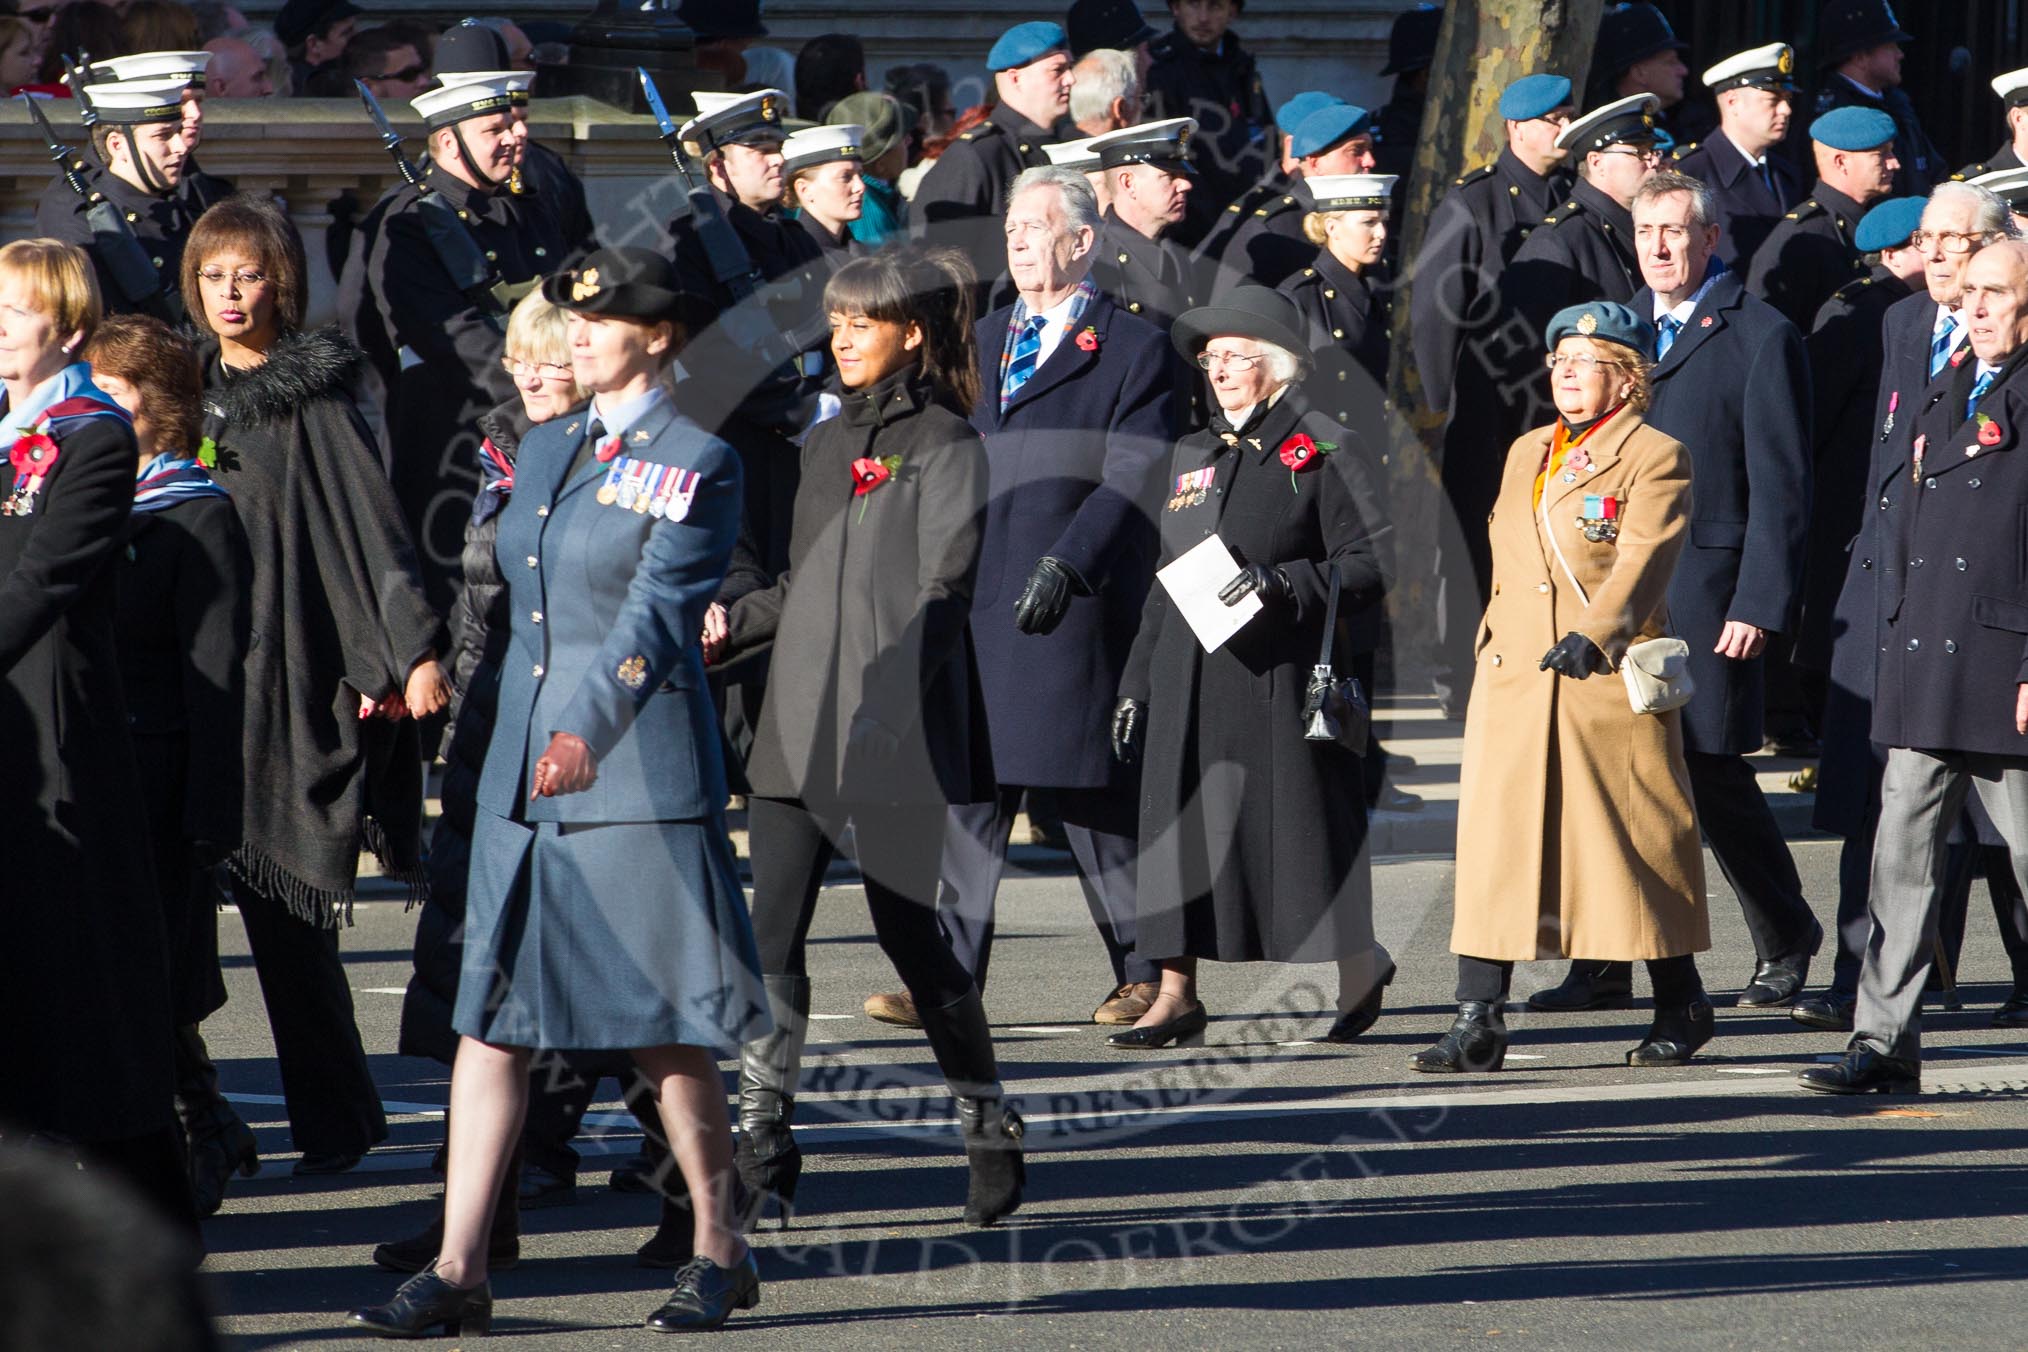 Remembrance Sunday 2012 Cenotaph March Past: Group C13 - Princess Mary's Royal Air Force Nursing Service Association..
Whitehall, Cenotaph,
London SW1,

United Kingdom,
on 11 November 2012 at 12:02, image #1121